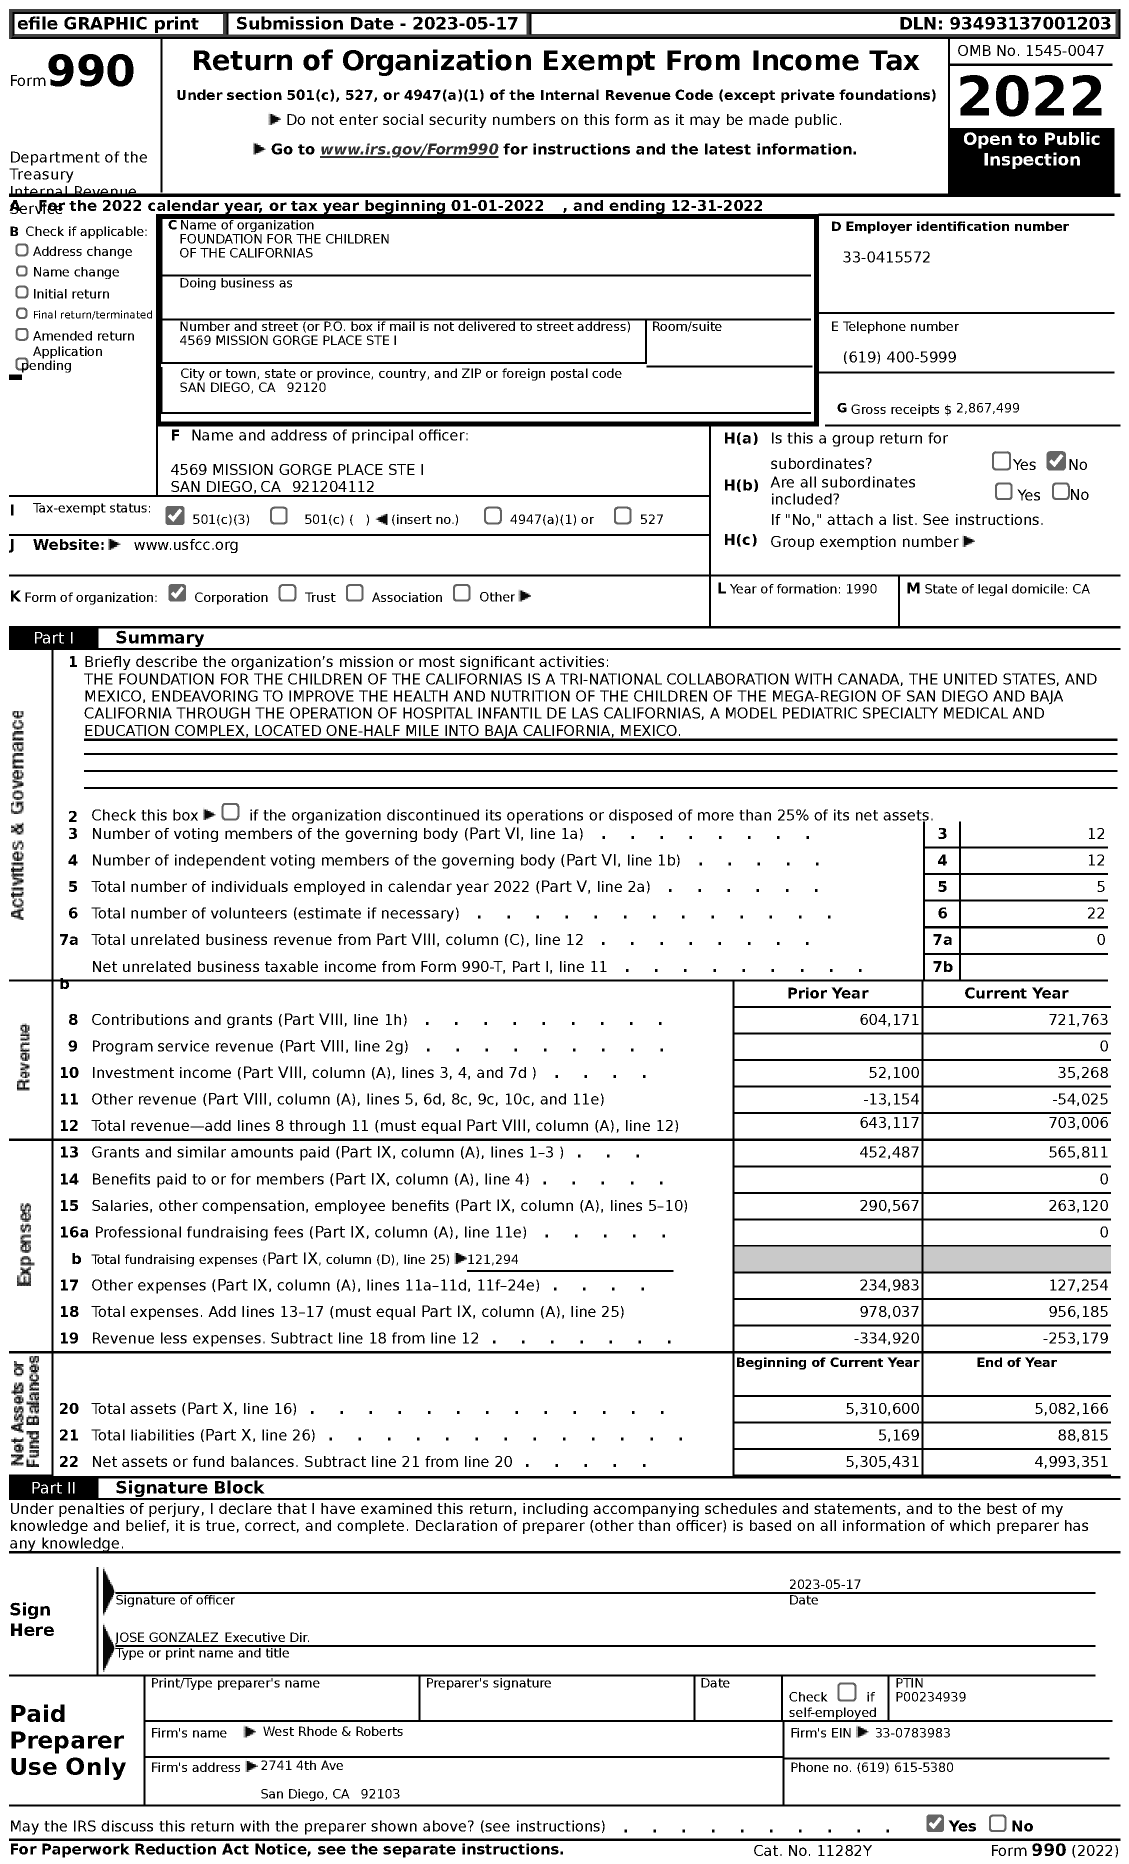 Image of first page of 2022 Form 990 for Foundation for the Children of the Californias